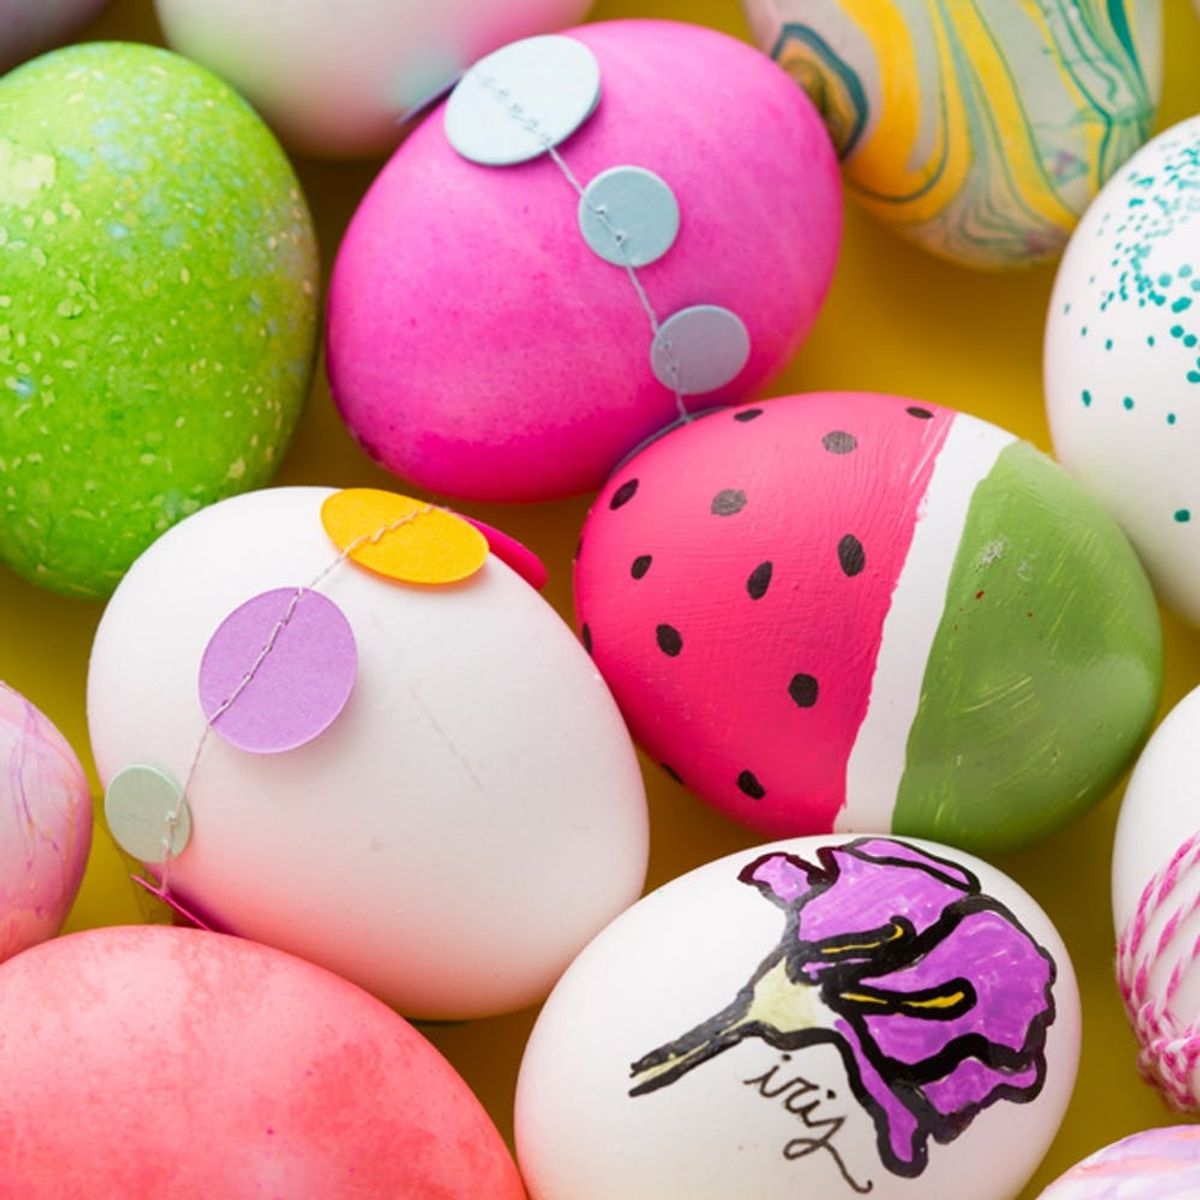 5 Completely Creative Easter Activities for Kids